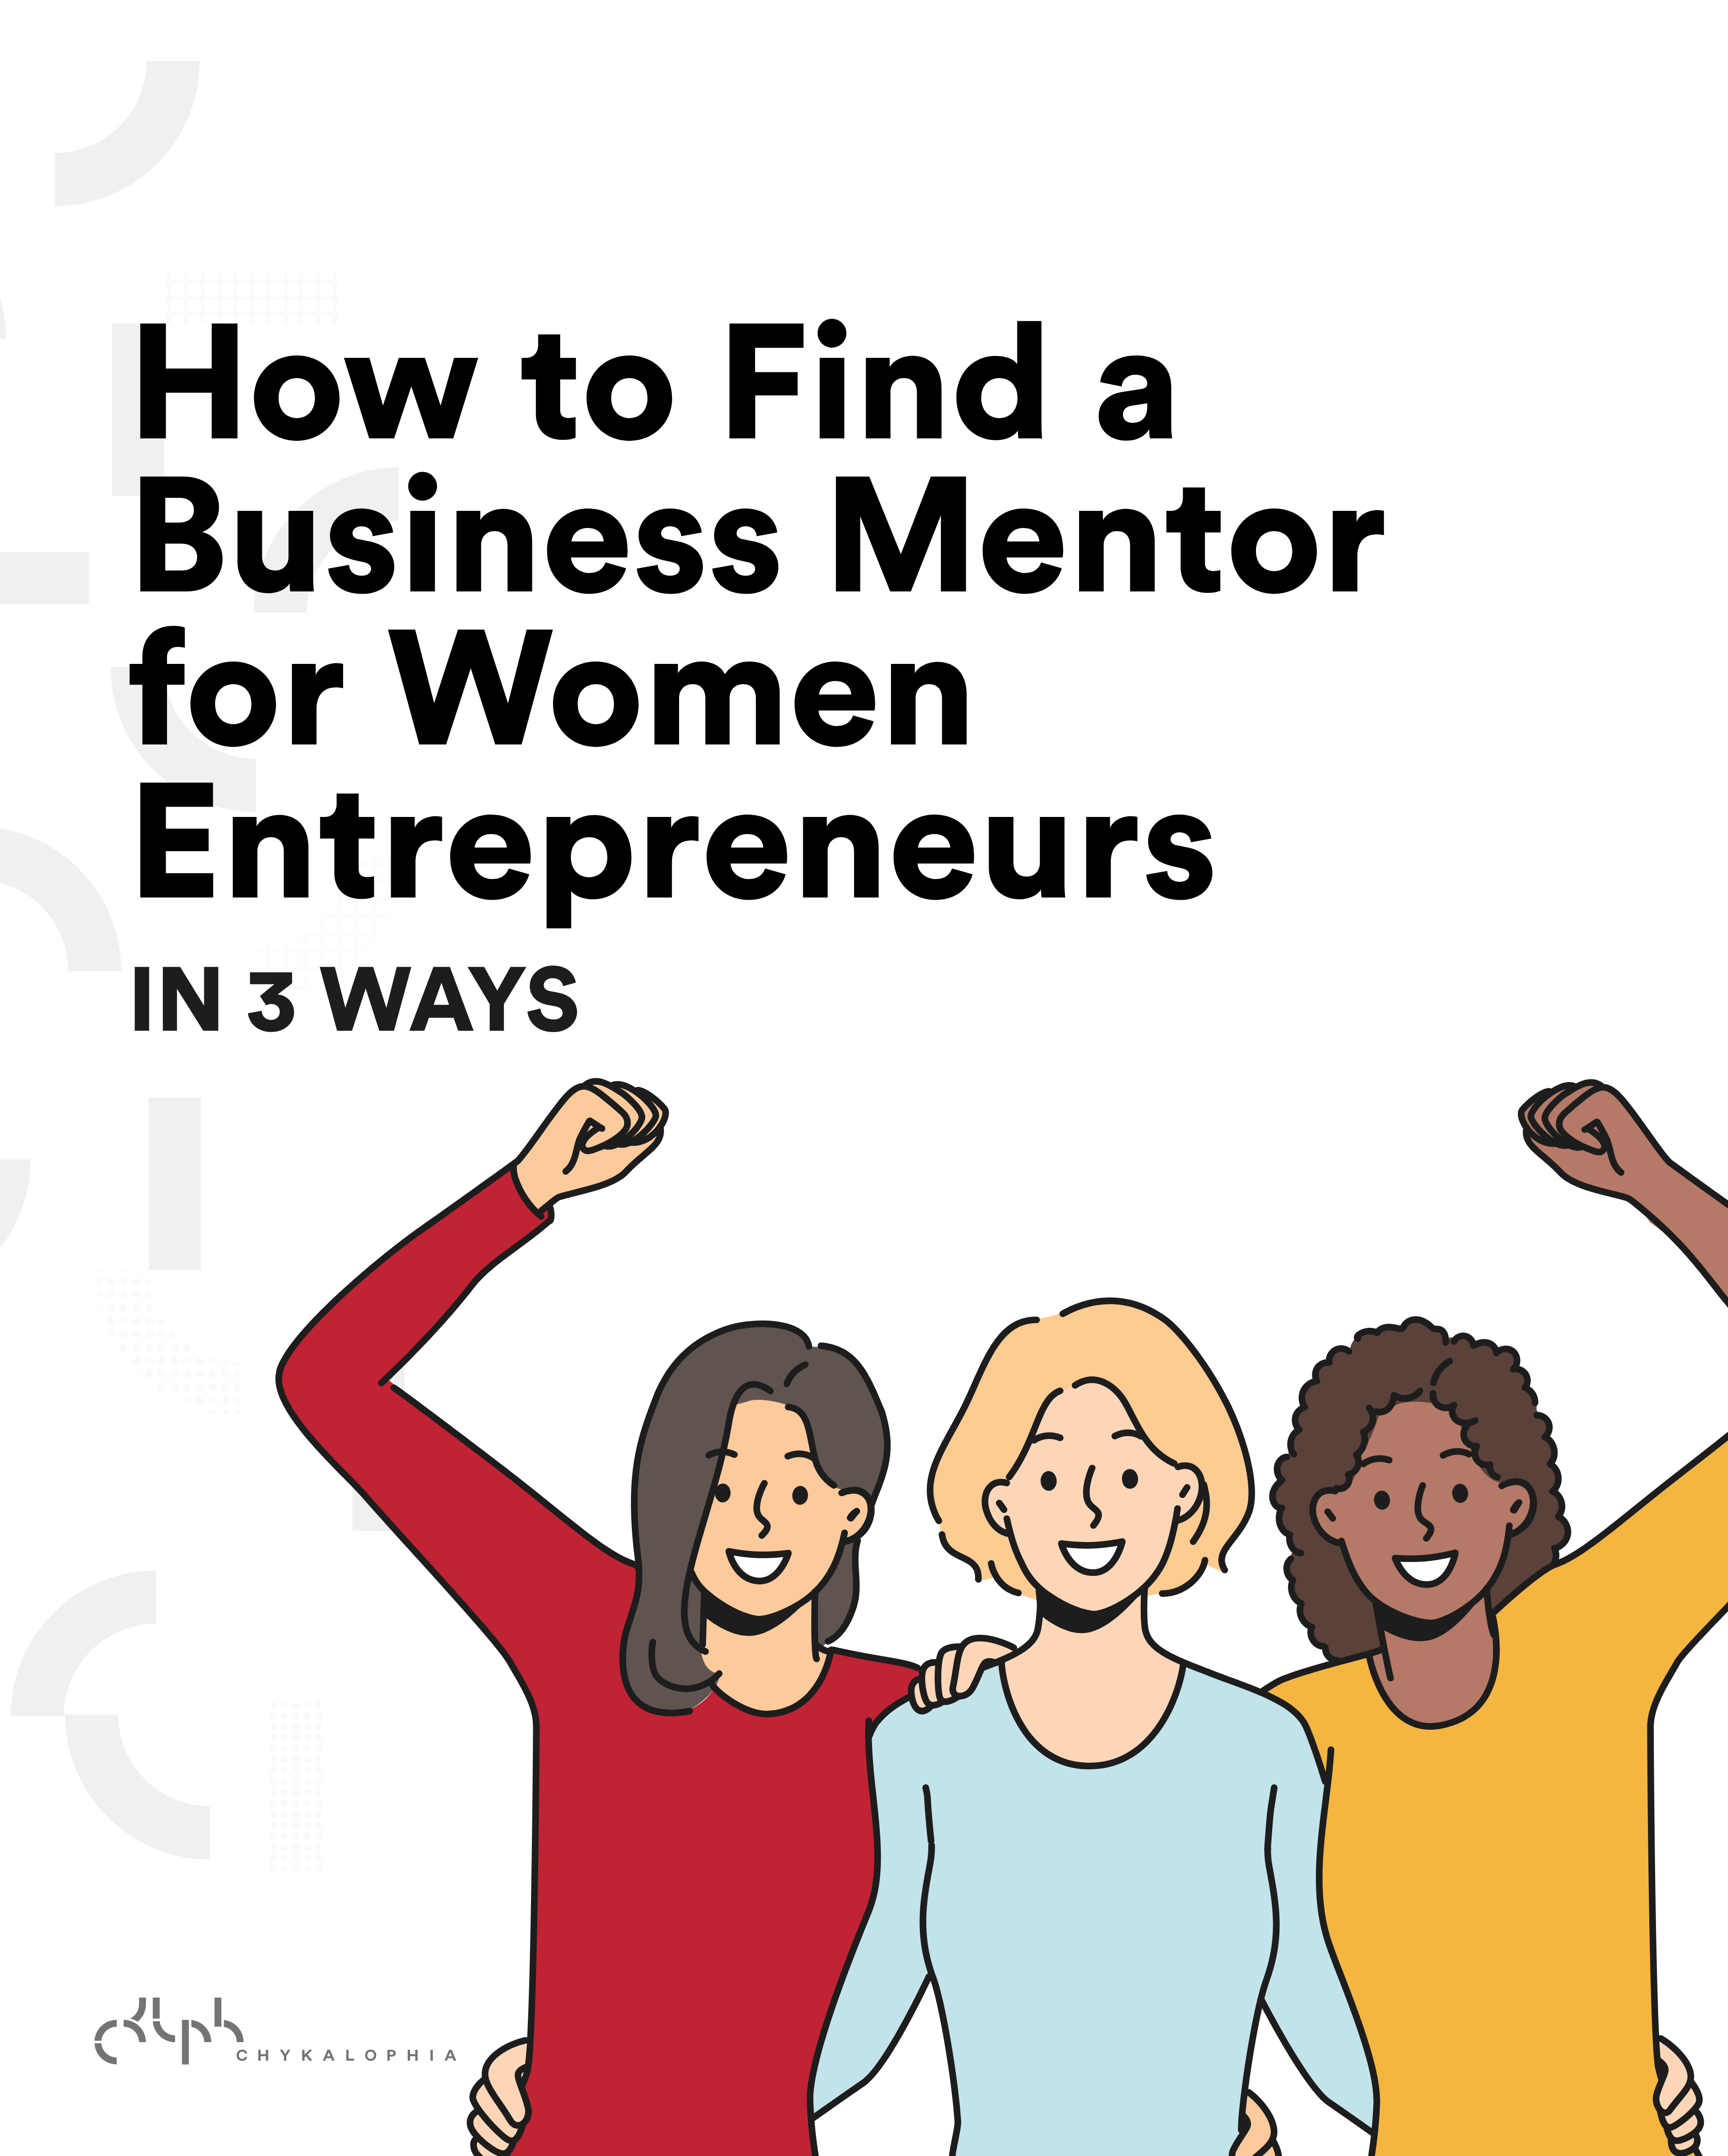 How to Find a Business Mentor for Women Entrepreneurs